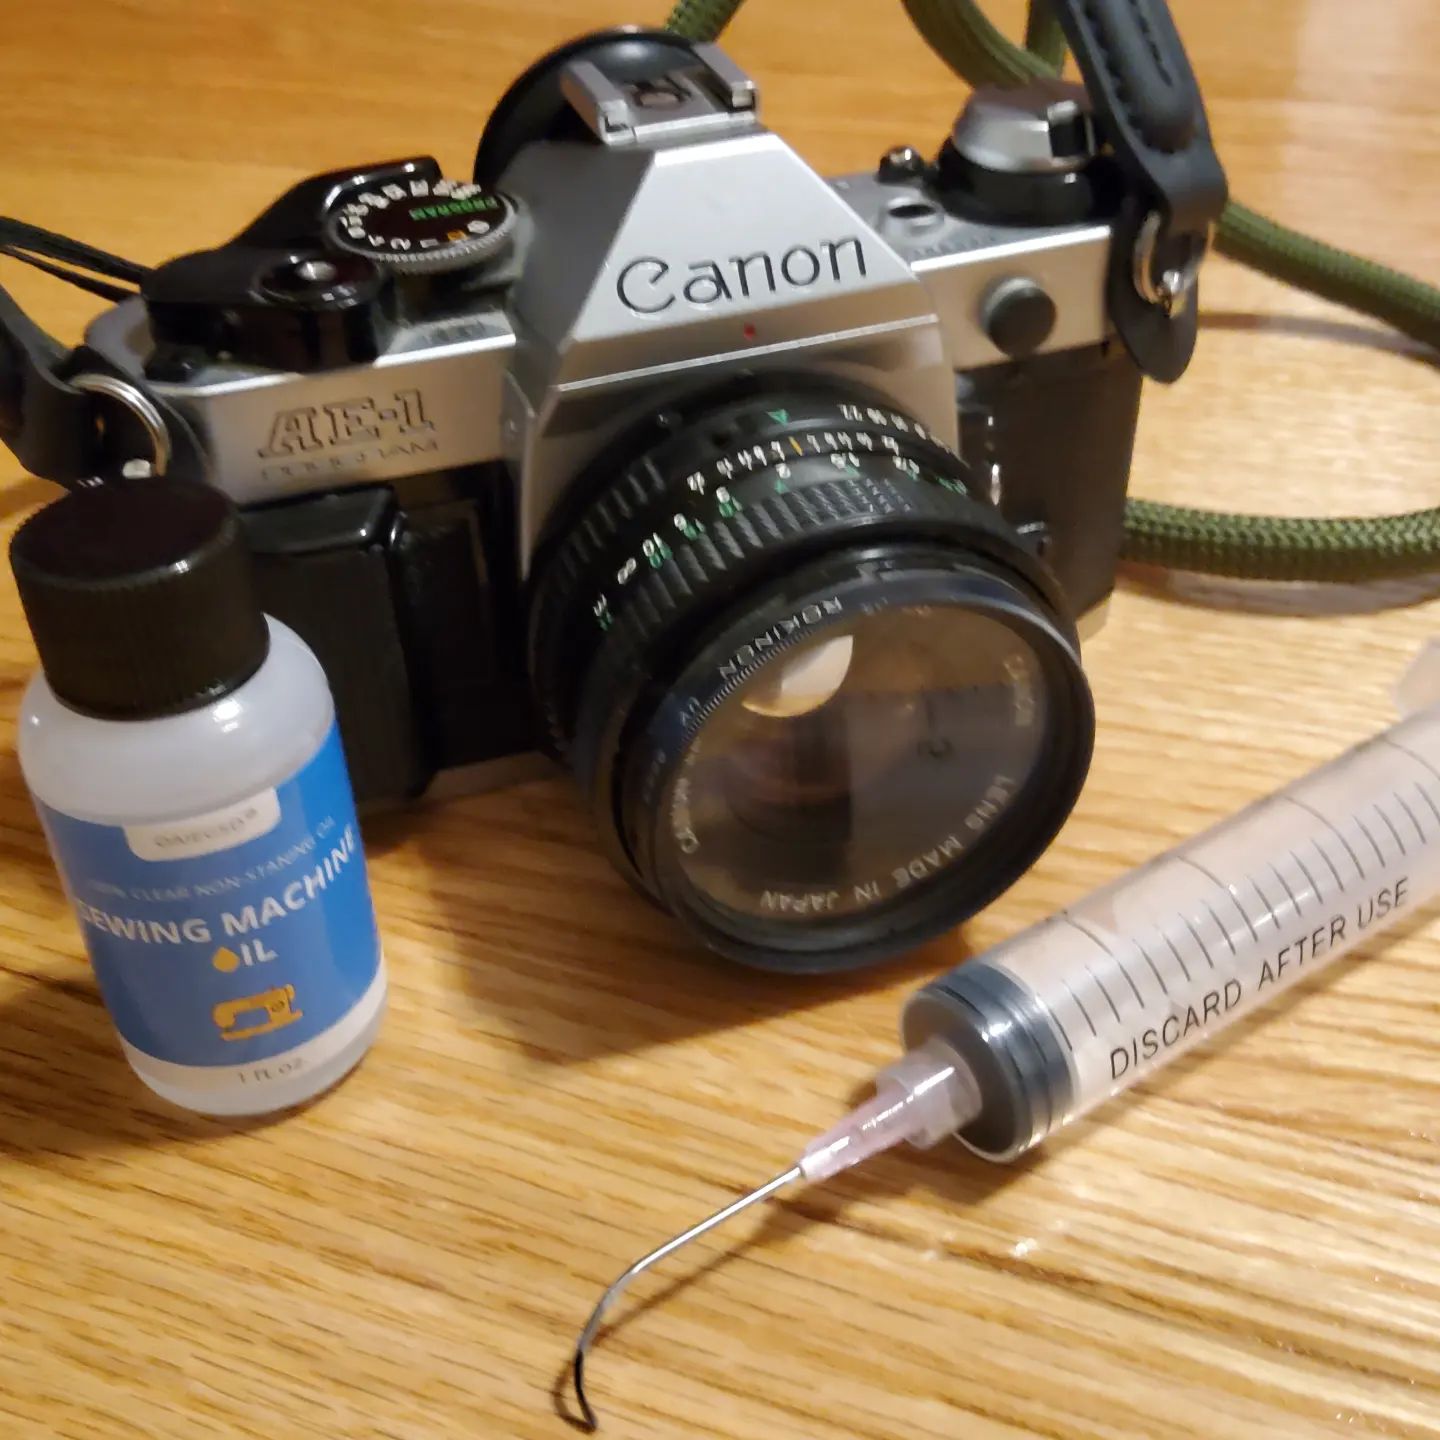 Fixed the #wheezy #shutter on my #canonAE1program with some light machine oil and an improvised curved needle.

#film
#photography
#filmphotography
#canon
#ae1
#program
#diy